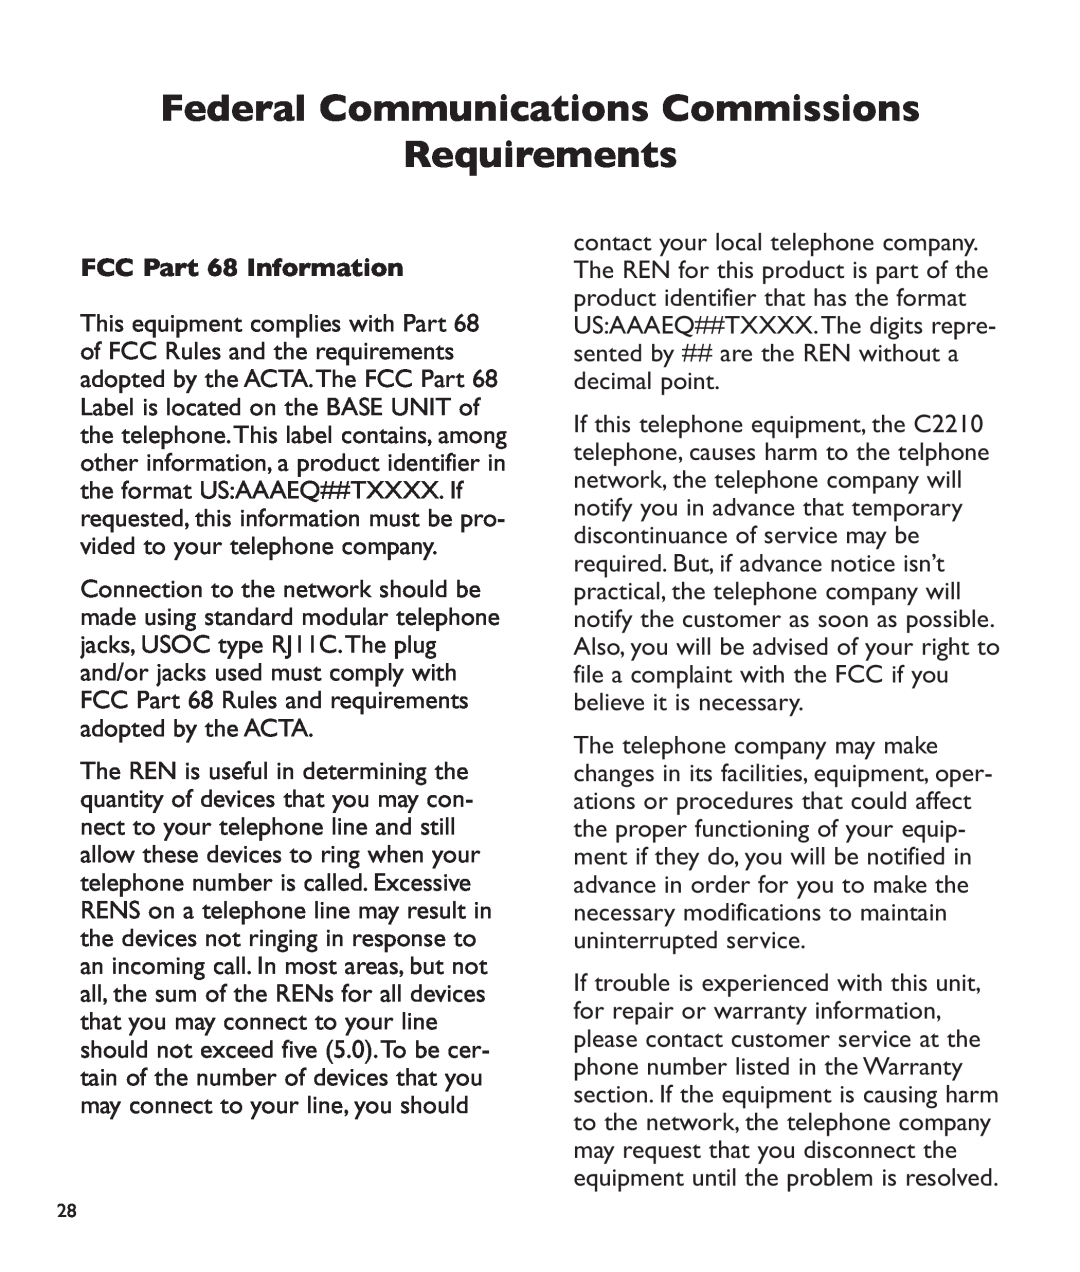 Clarity c2210 manual Federal Communications Commissions Requirements, FCC Part 68 Information 